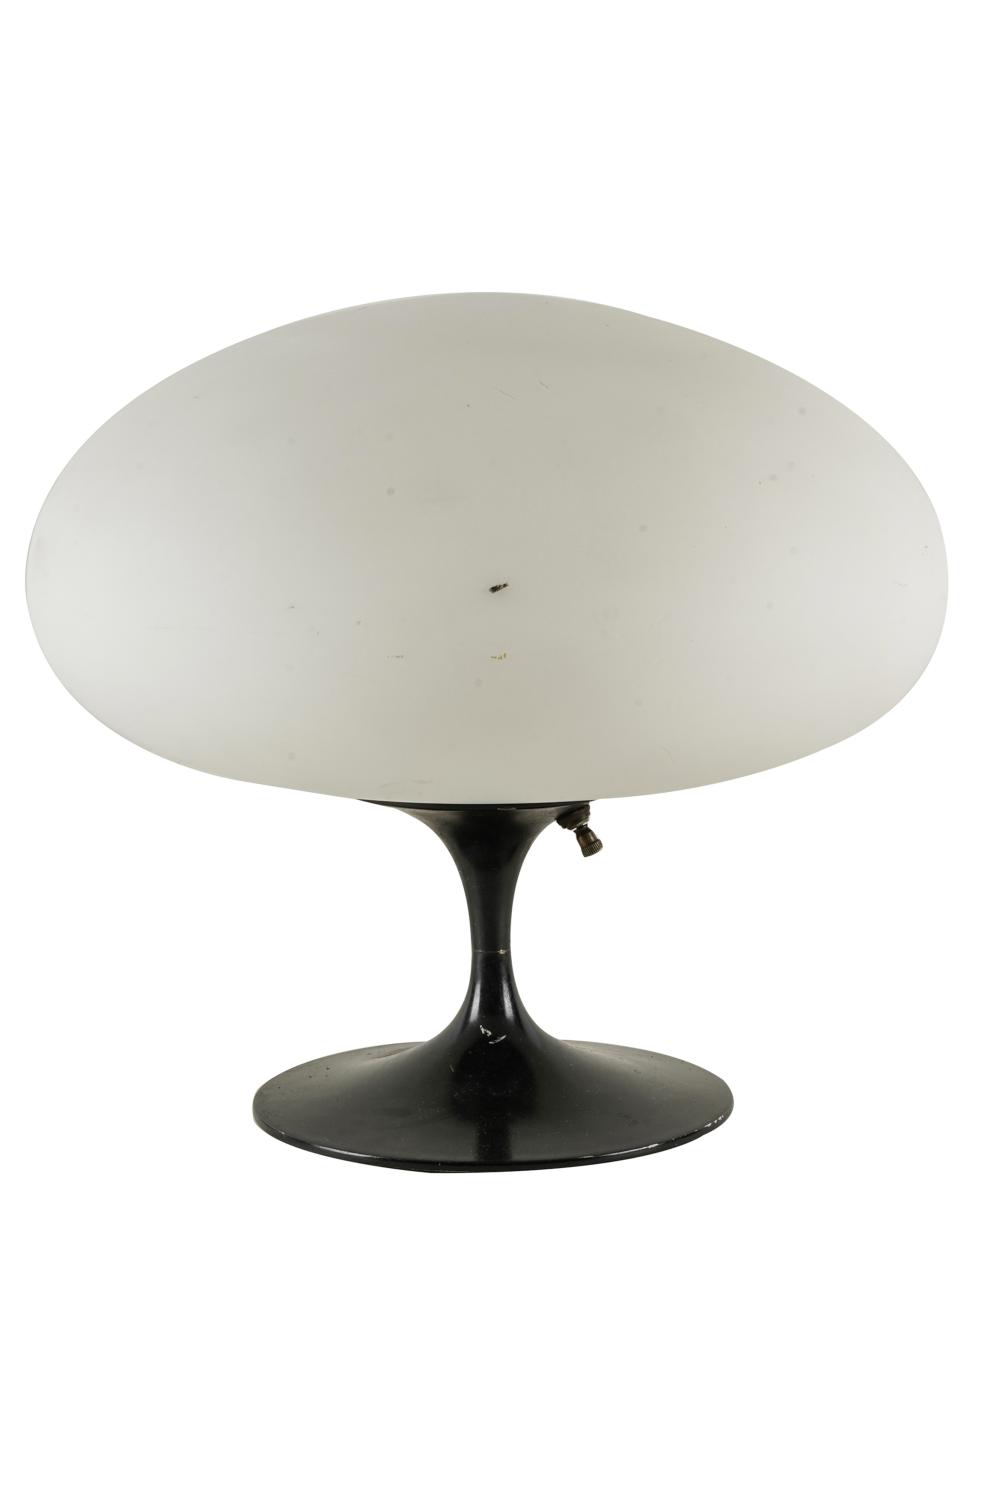 BILL CURRY TABLE LAMPthe frosted 333647